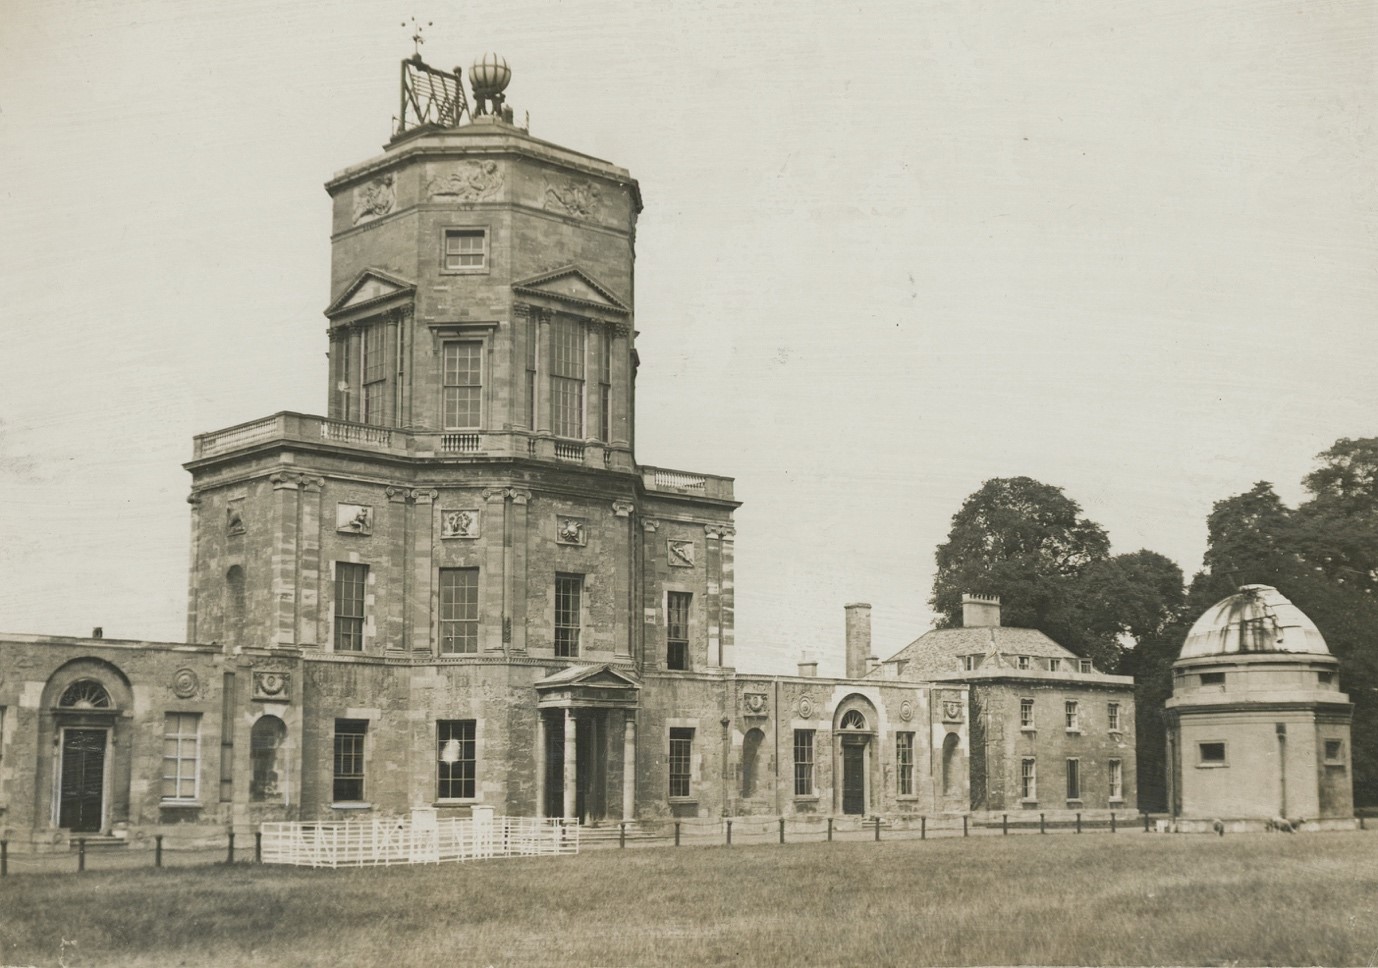 Black and white view of the front of the Radcliffe Observatory in 1929